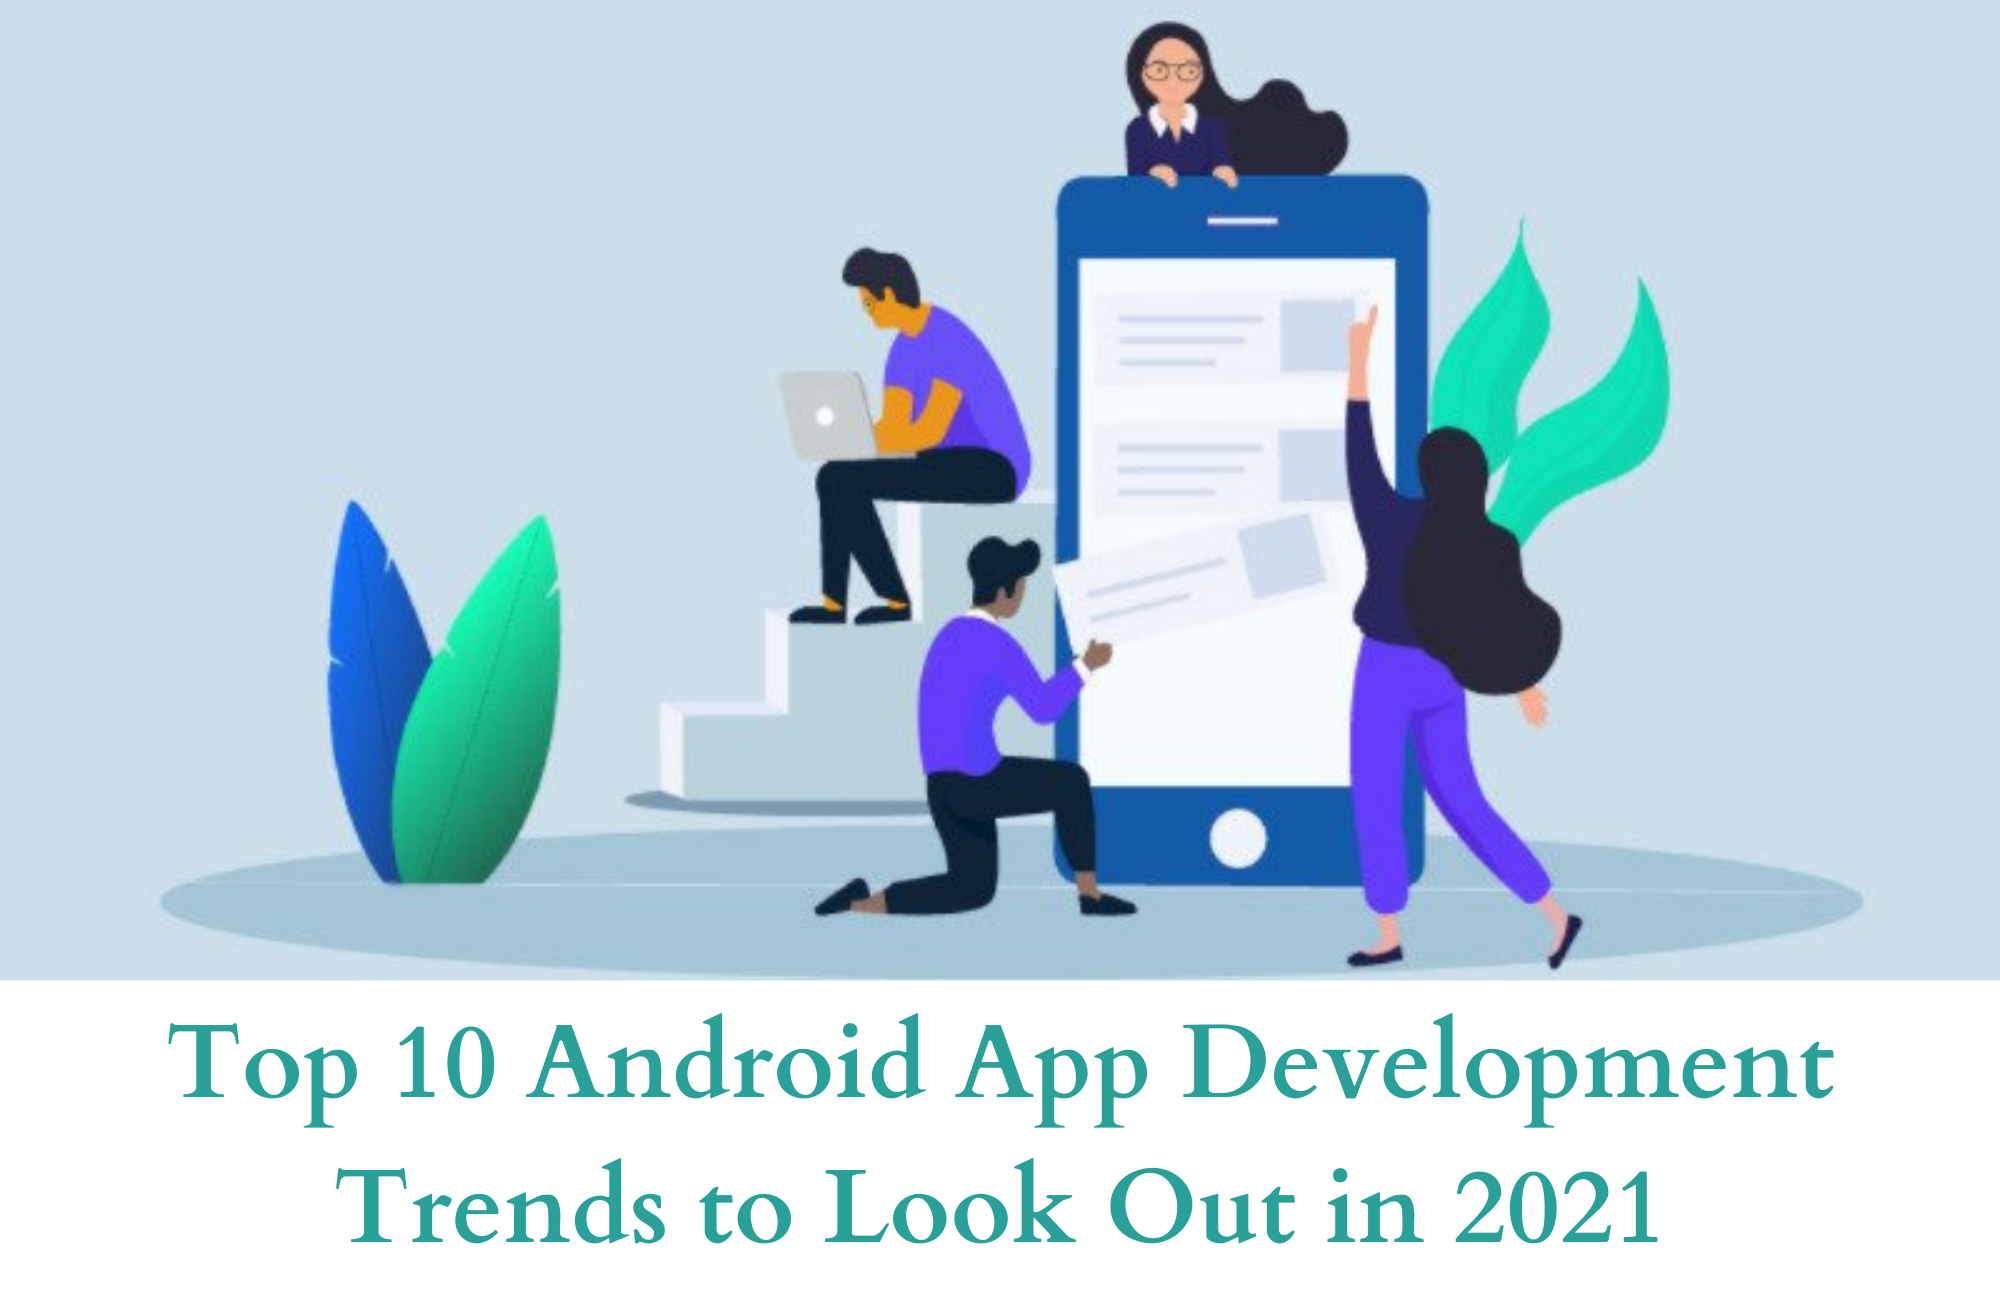 Top 10 Android App Development Trends to Look Out in 2021